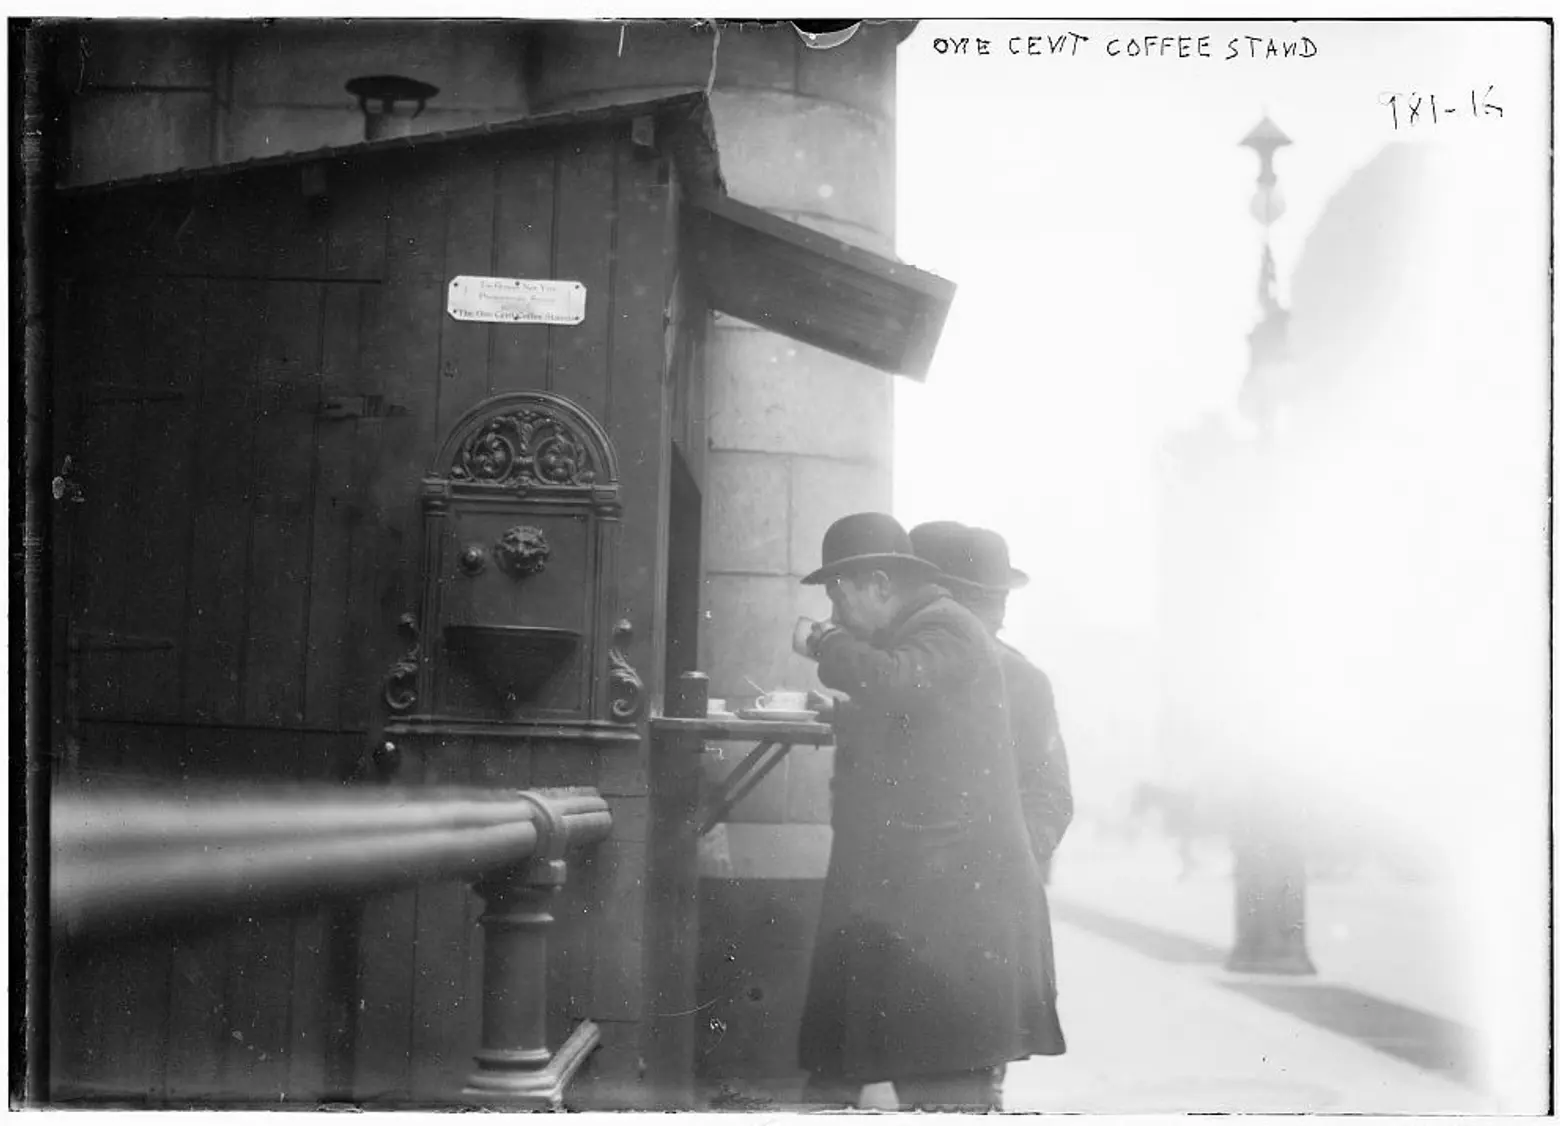 One-Cent Coffee Stand Fed Hungry New Yorkers Back in the Day | 6sqft